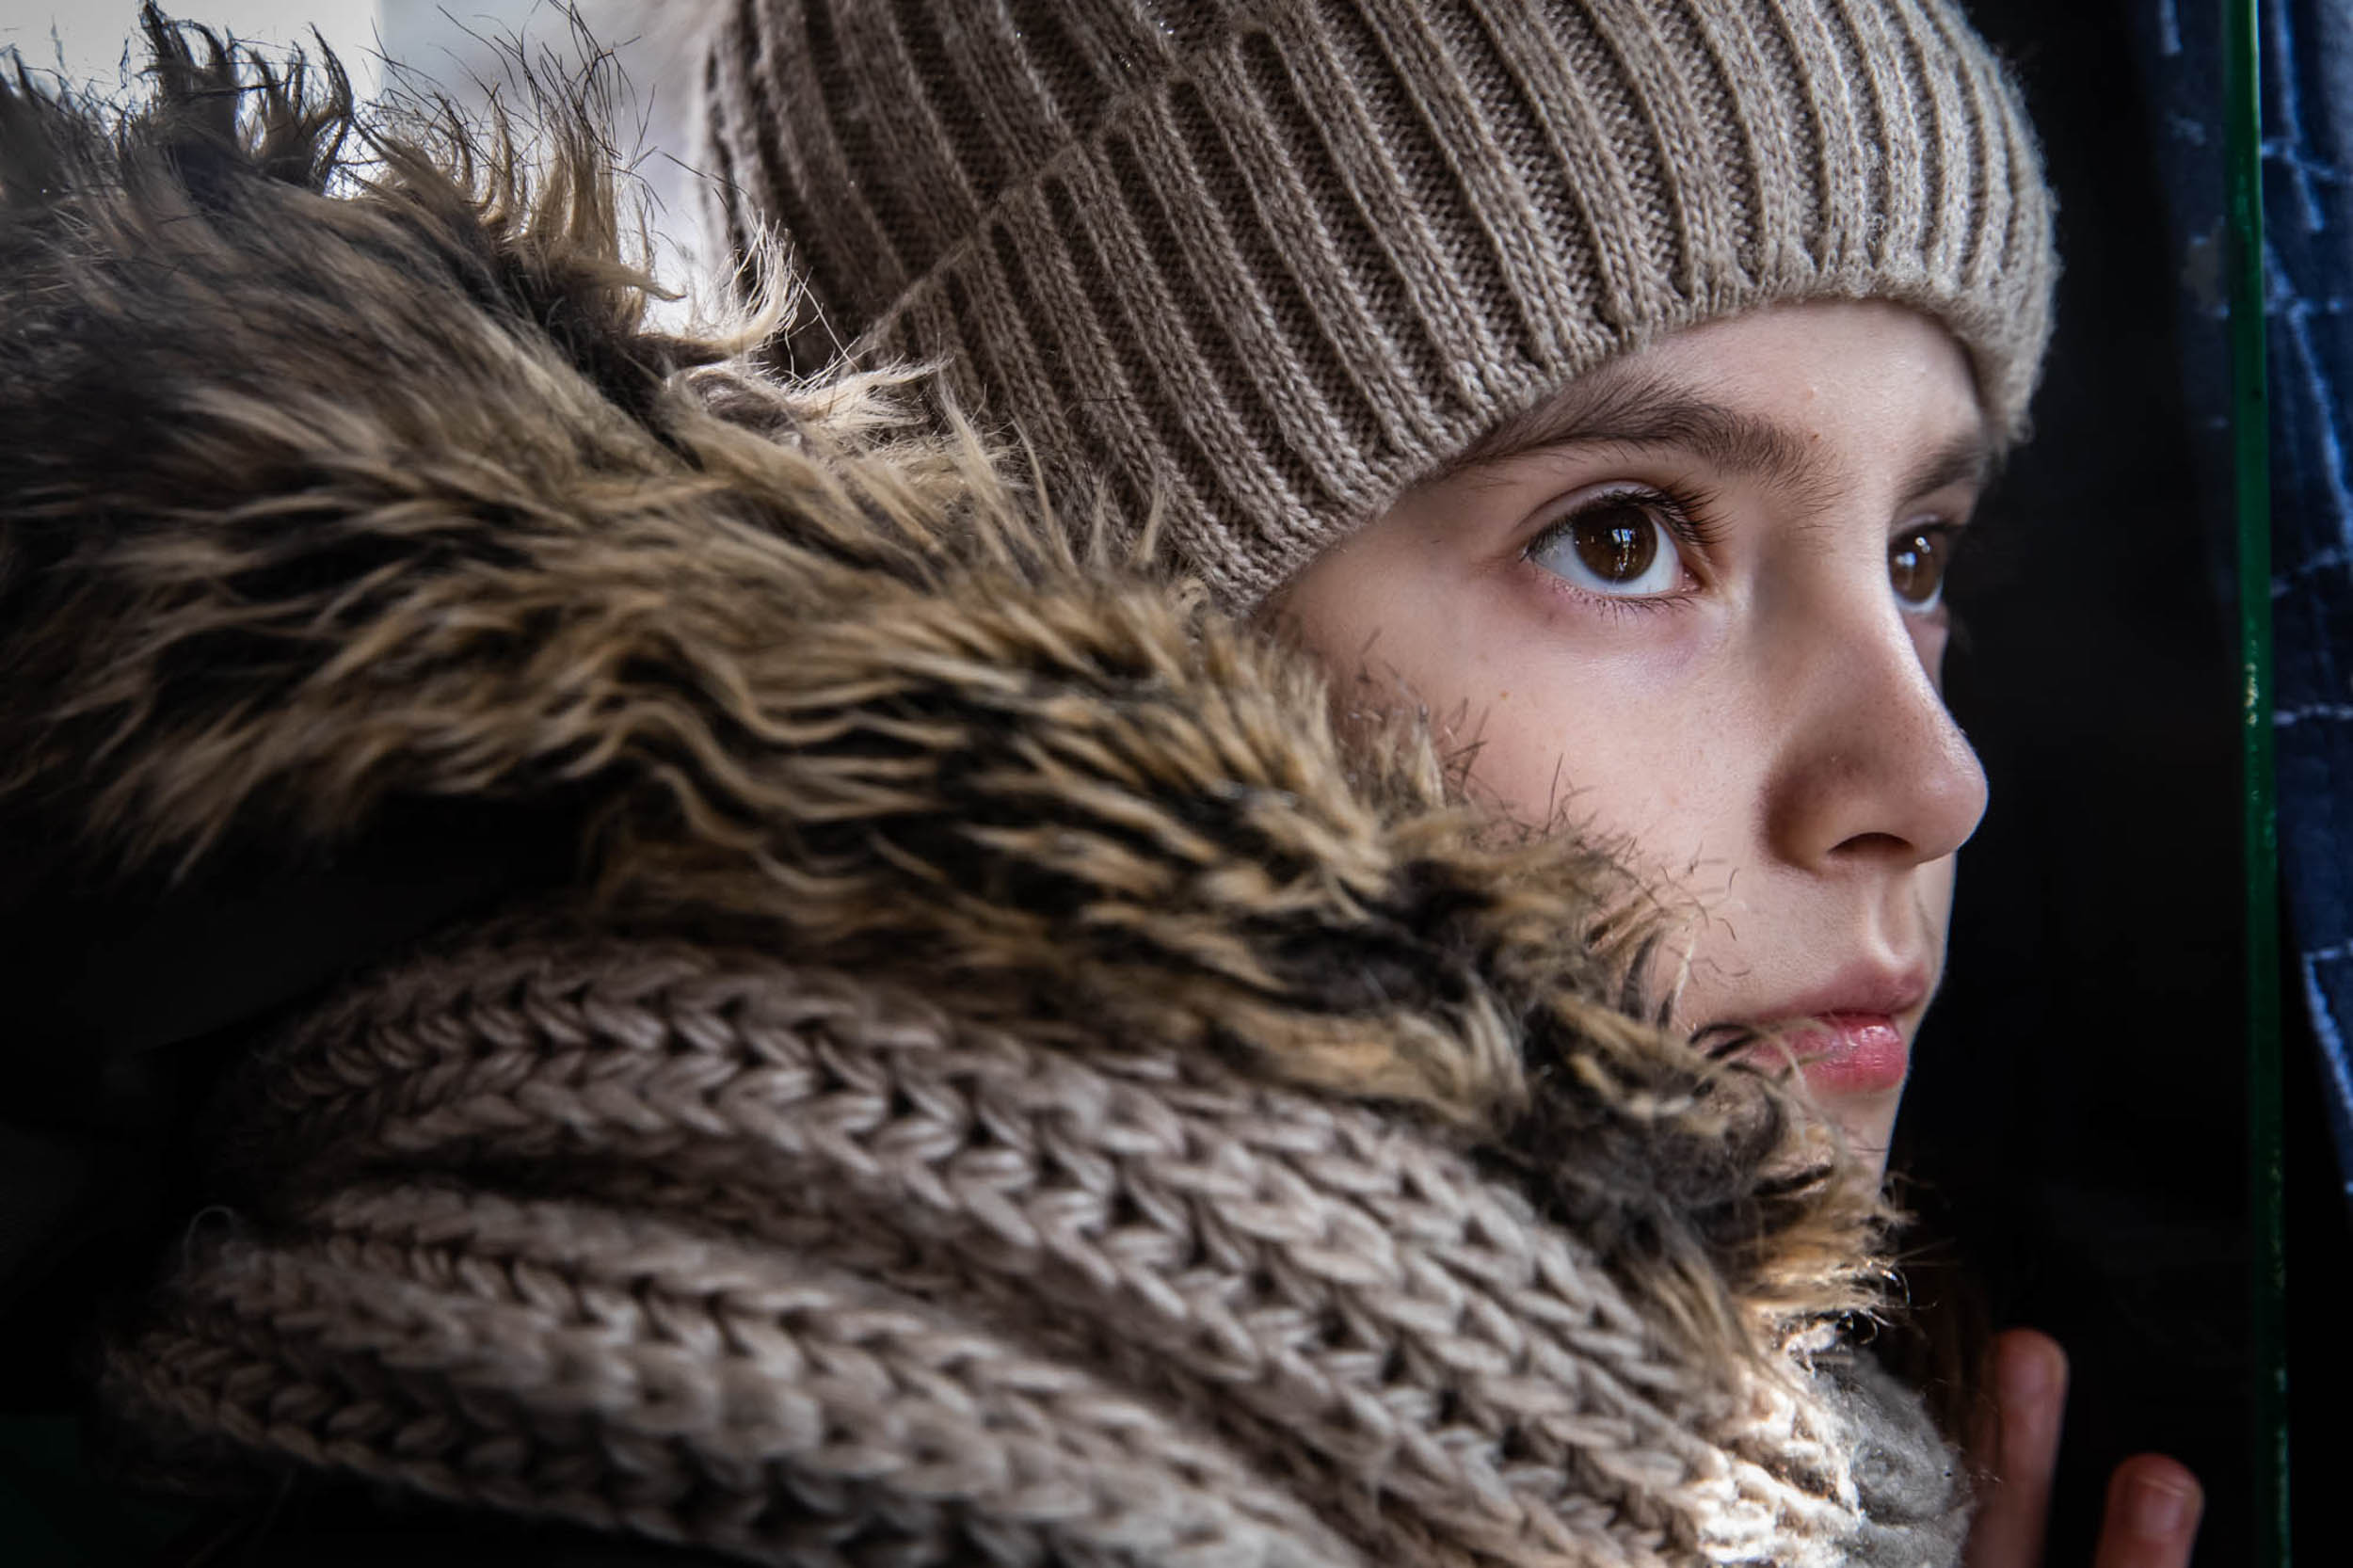 Lena,15, staring ahead while on an evacuation bus from Mykolaiv to Chisinau. 